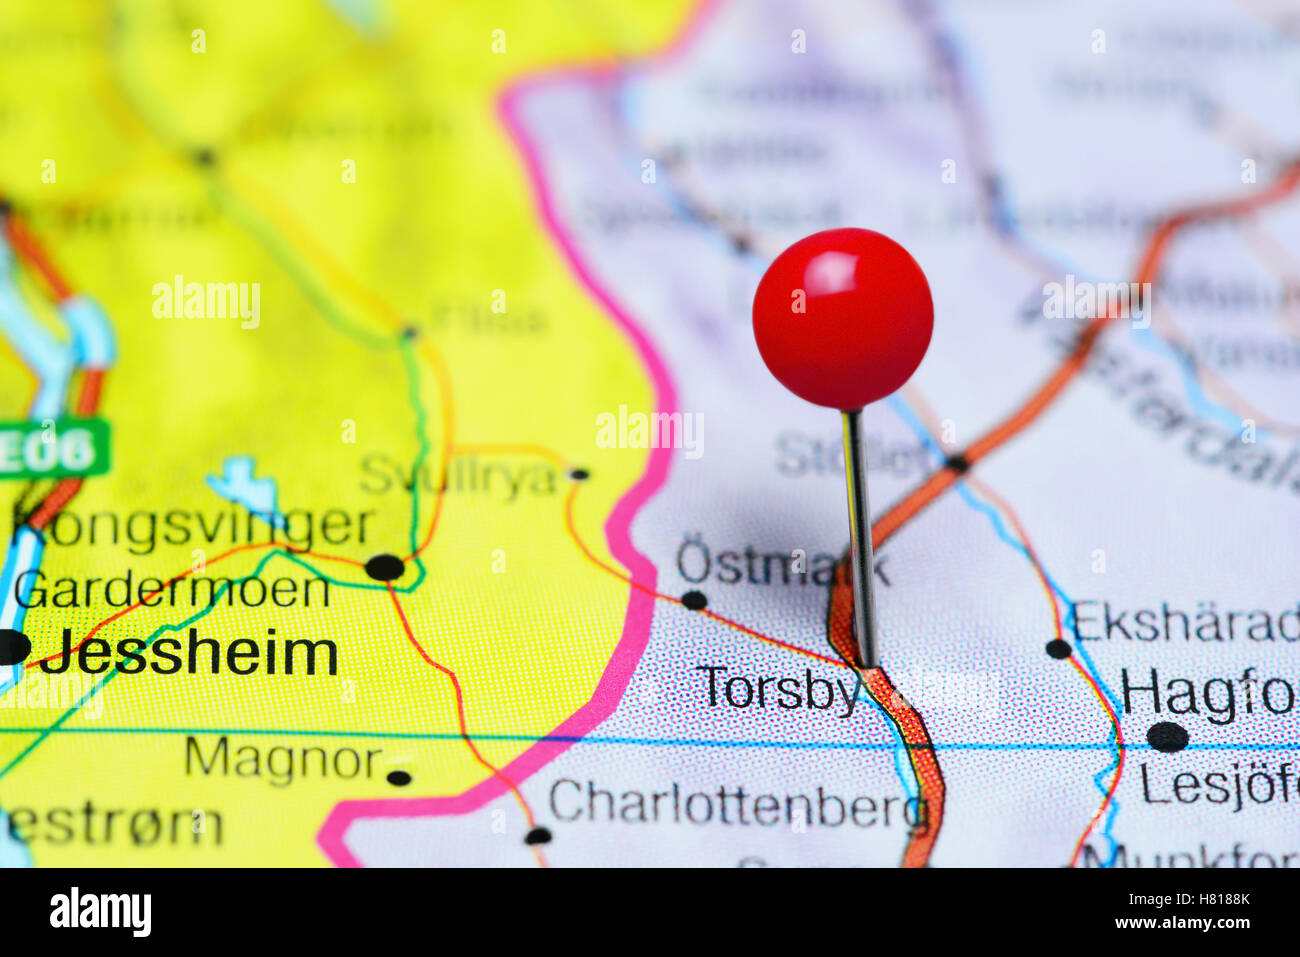 Torsby pinned on a map of Sweden Stock Photo